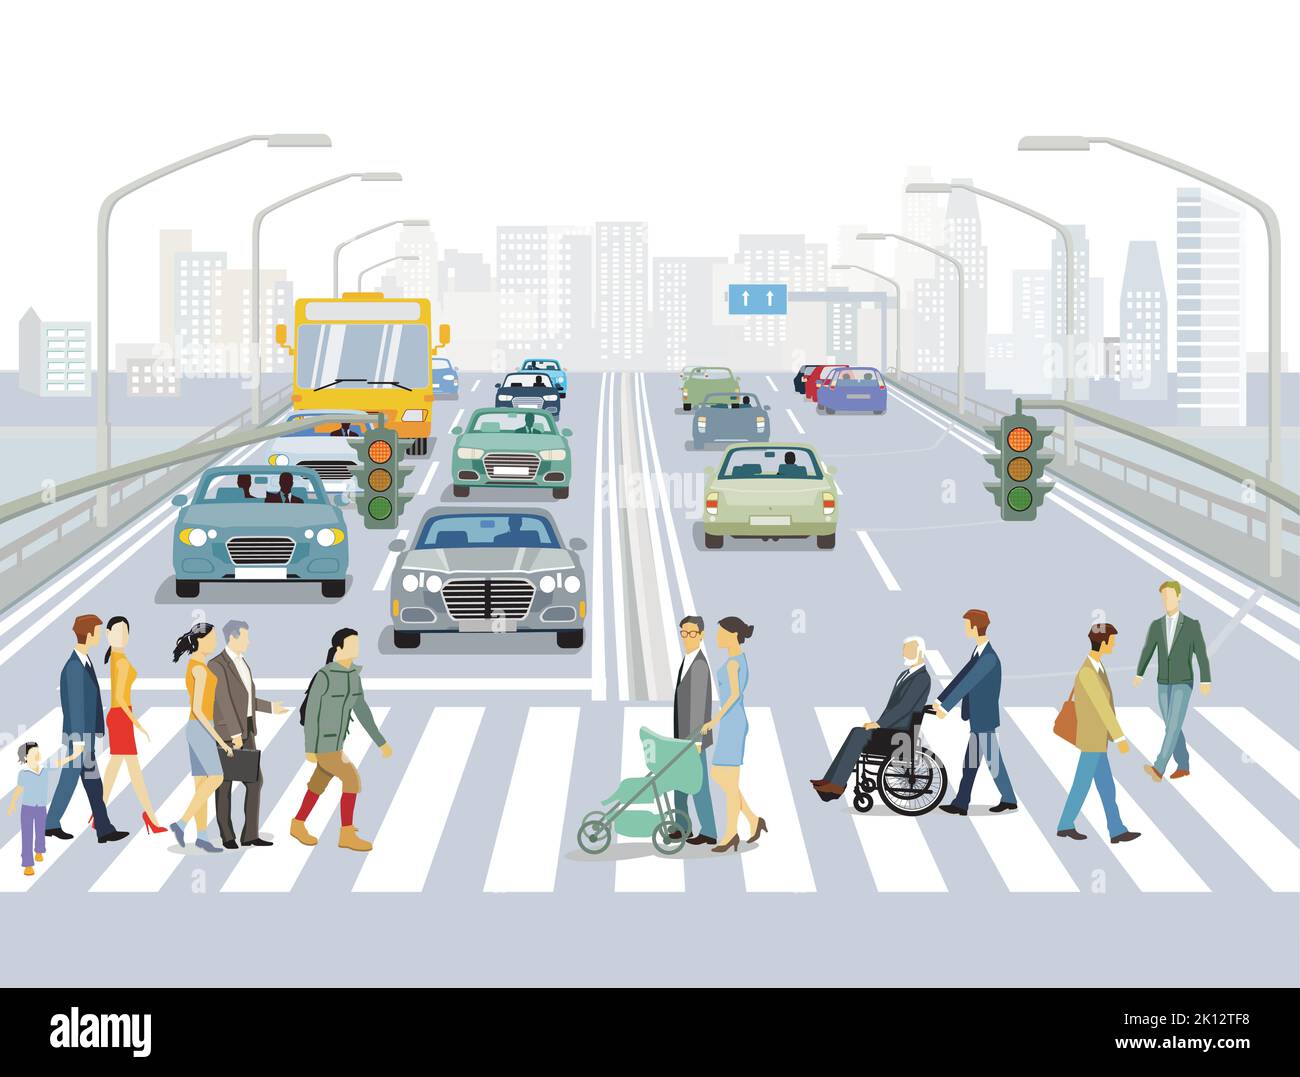 People on the crosswalk and road traffic, illustration Stock Vector